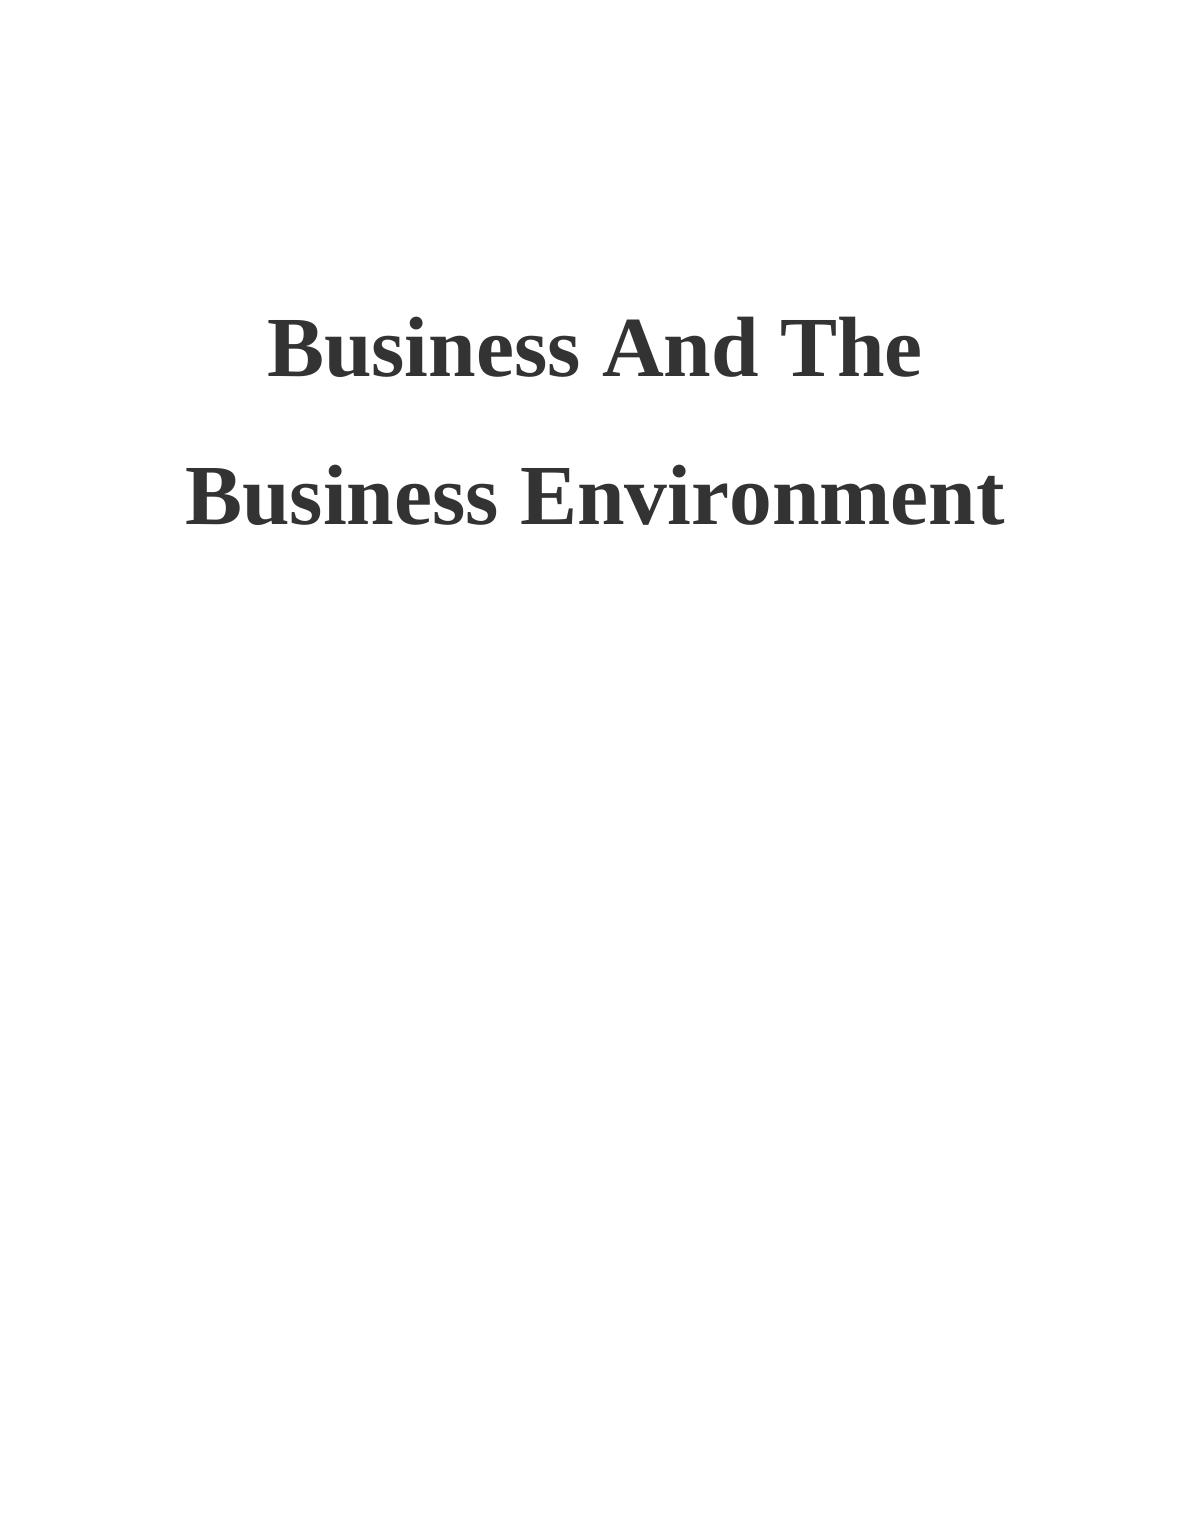 Business and The Business Environment Assignment - Savoy hotel_1